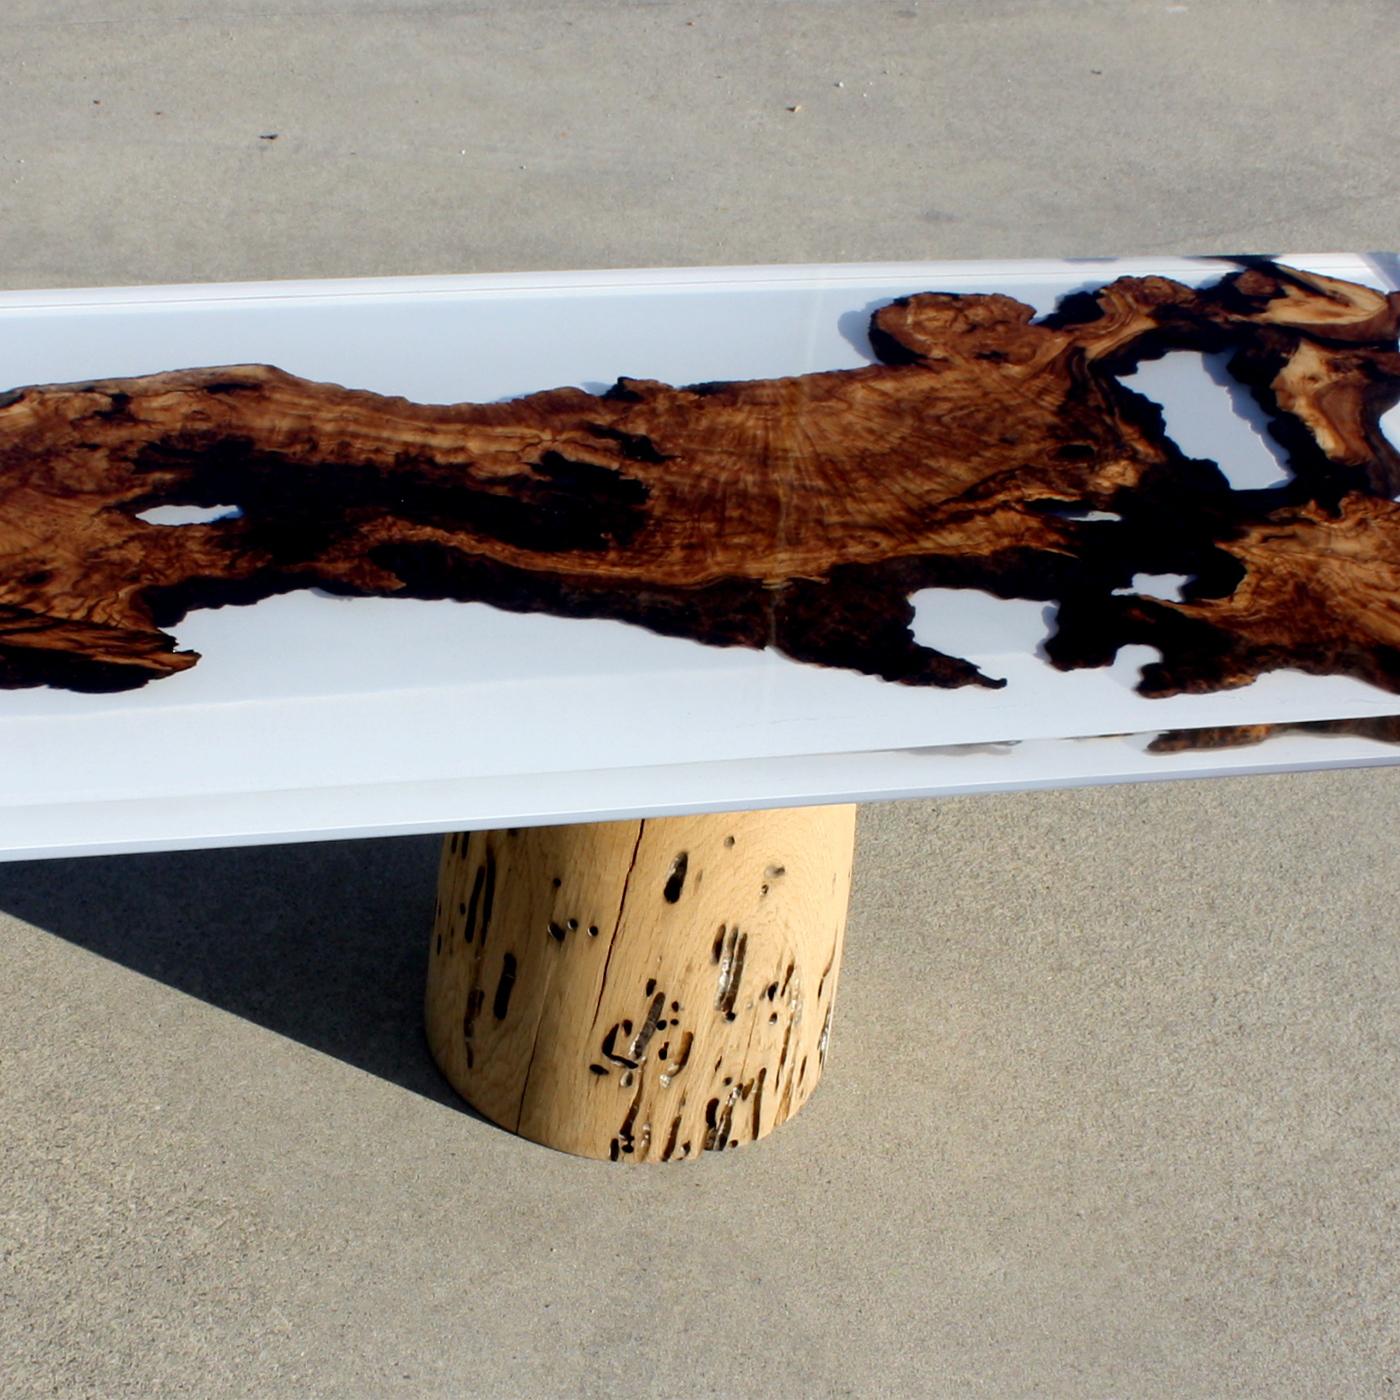 This splendid 122 x 60 cm wooden table top is made of olive root immersed in transparent resin with a bright white background. This piece is ideal as a coffee table, console or even as an ornamental panel. This unique piece of furniture is fully